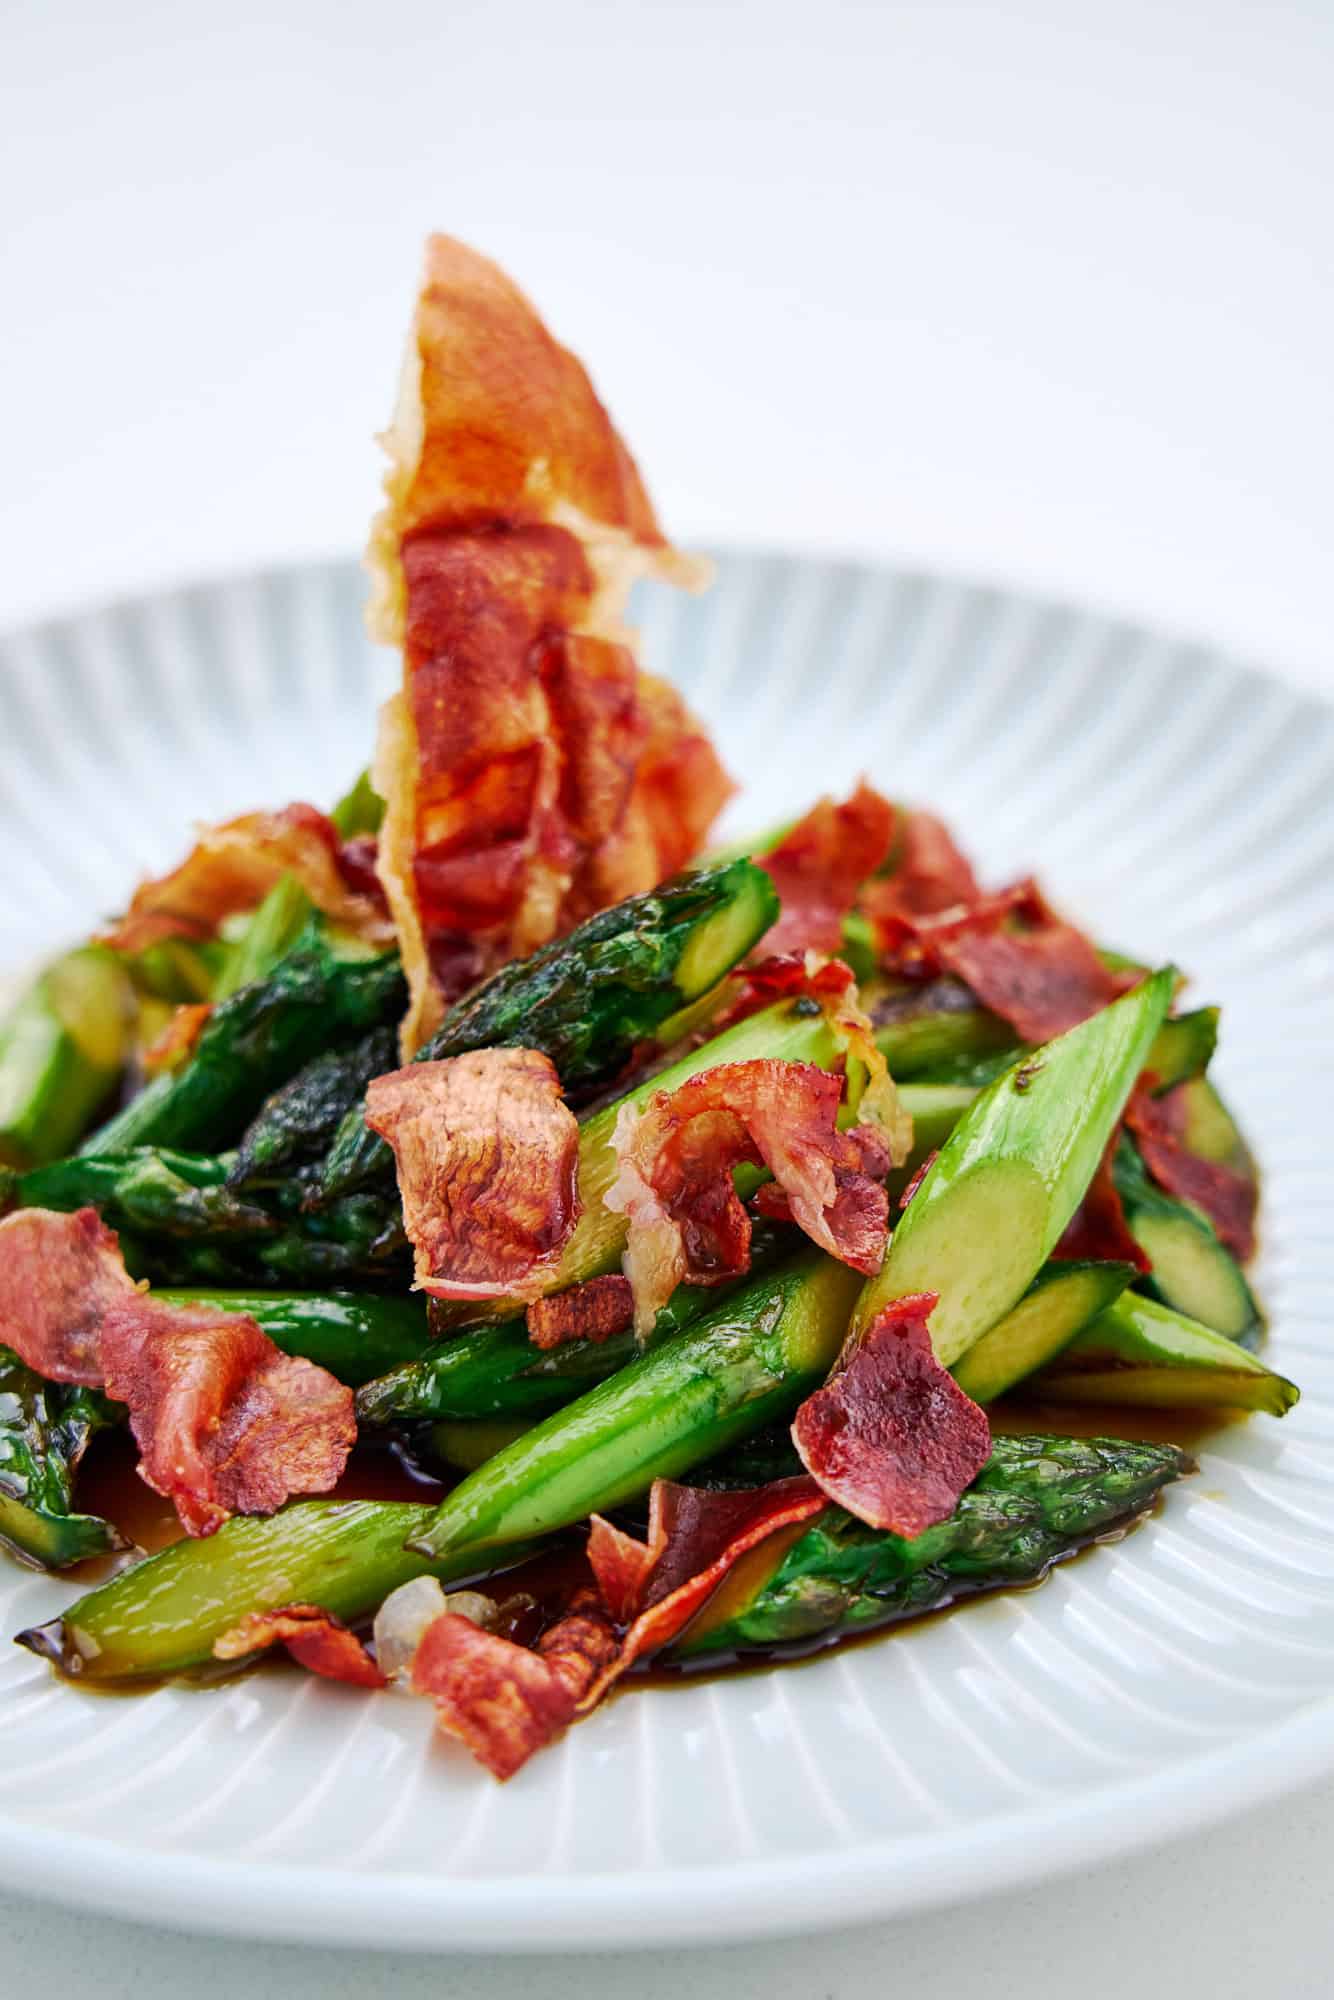 A plate of honey glazed asparagus spears with dry-cured ham that's been crisped in a microwave oven.